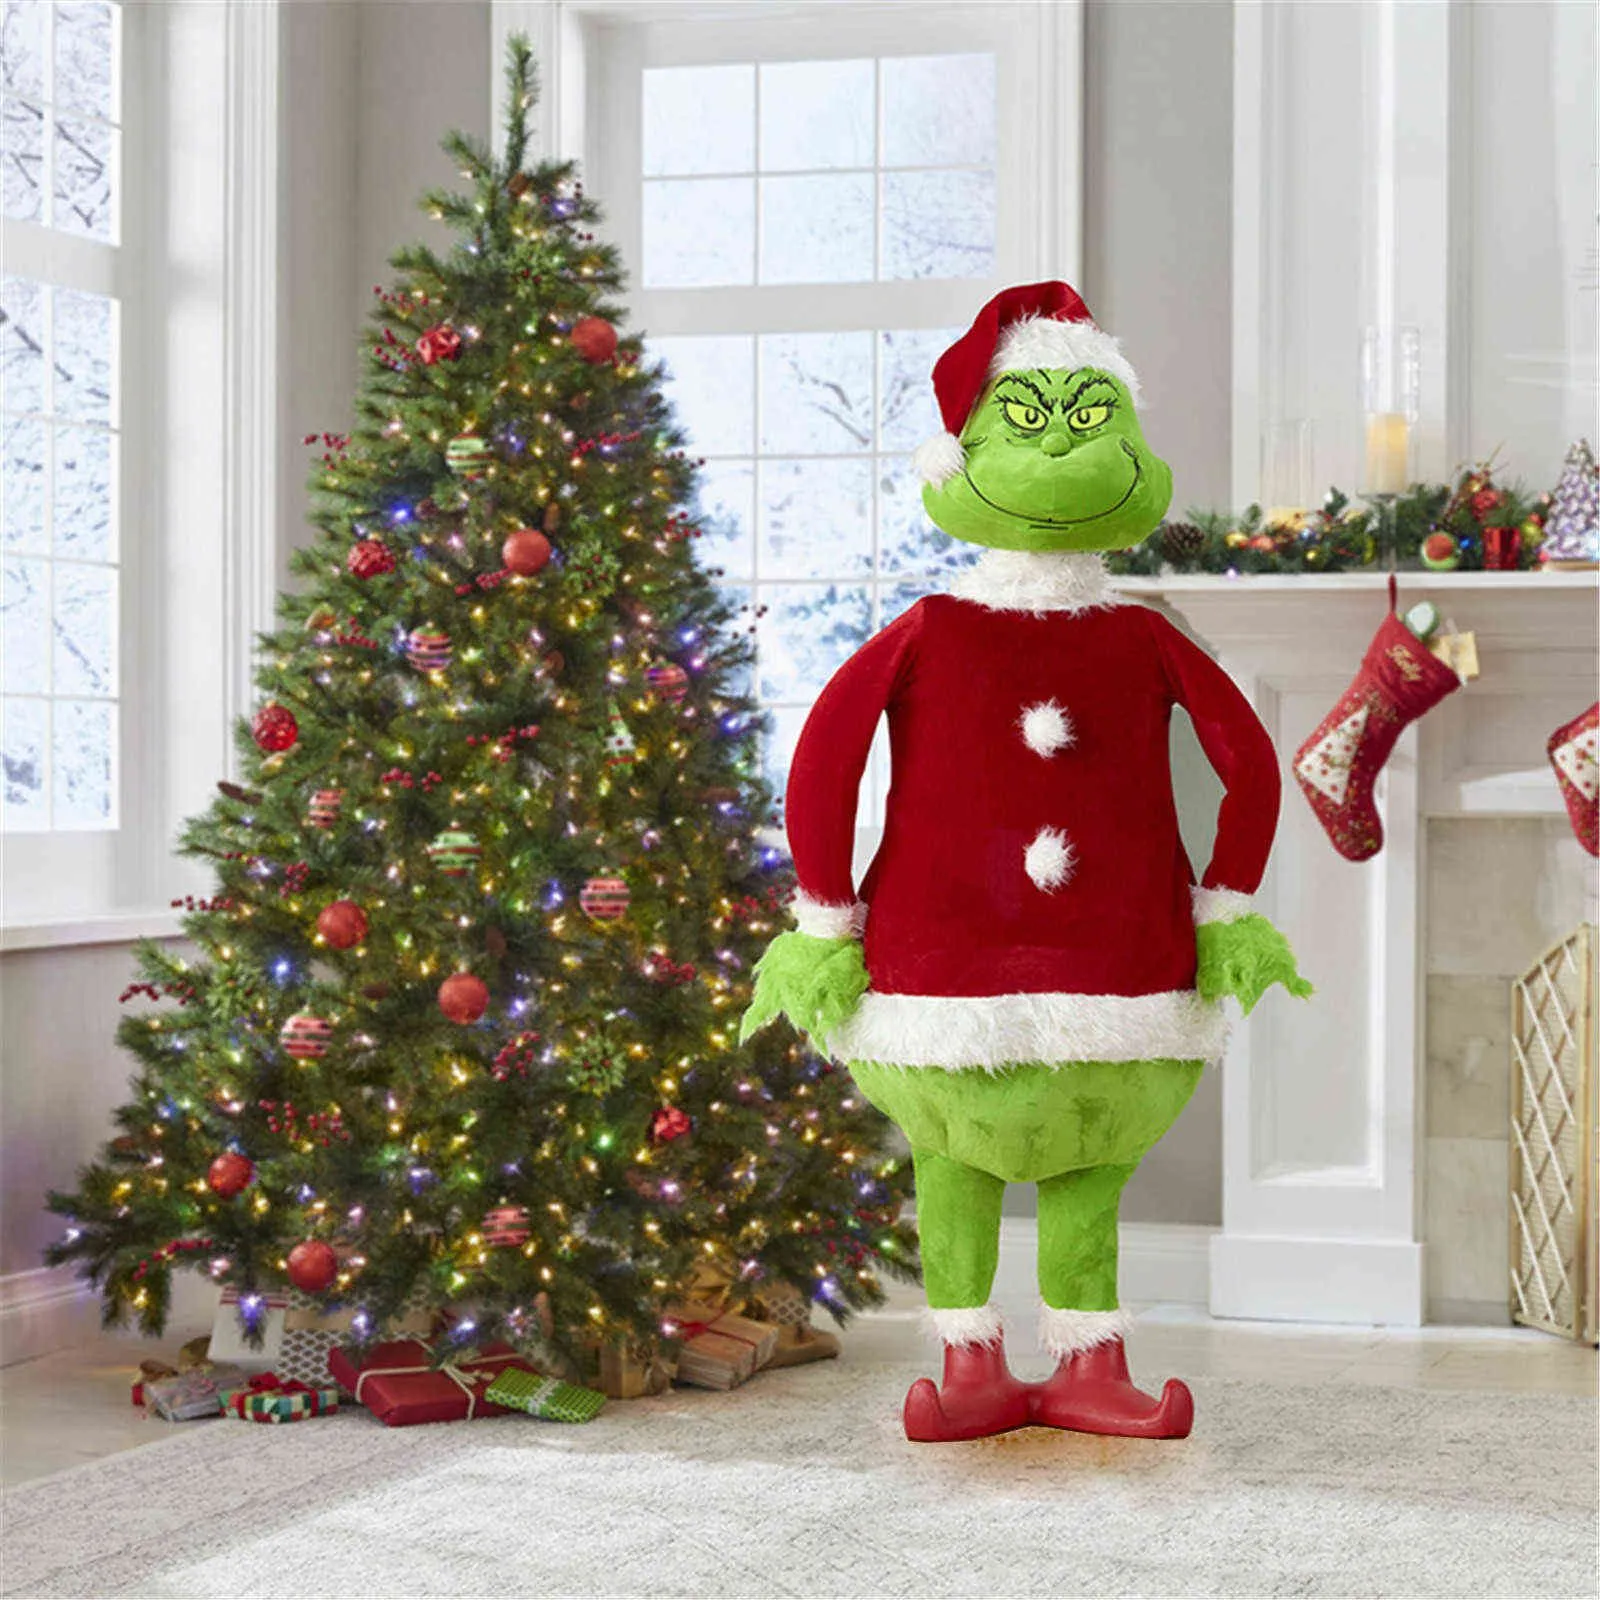 Navidea Delivery Christmas Animated Fast Room Decoration Tree Realistic Ornament 2020 G0911 Gift Decoracin Grinch Doll Rgrtk